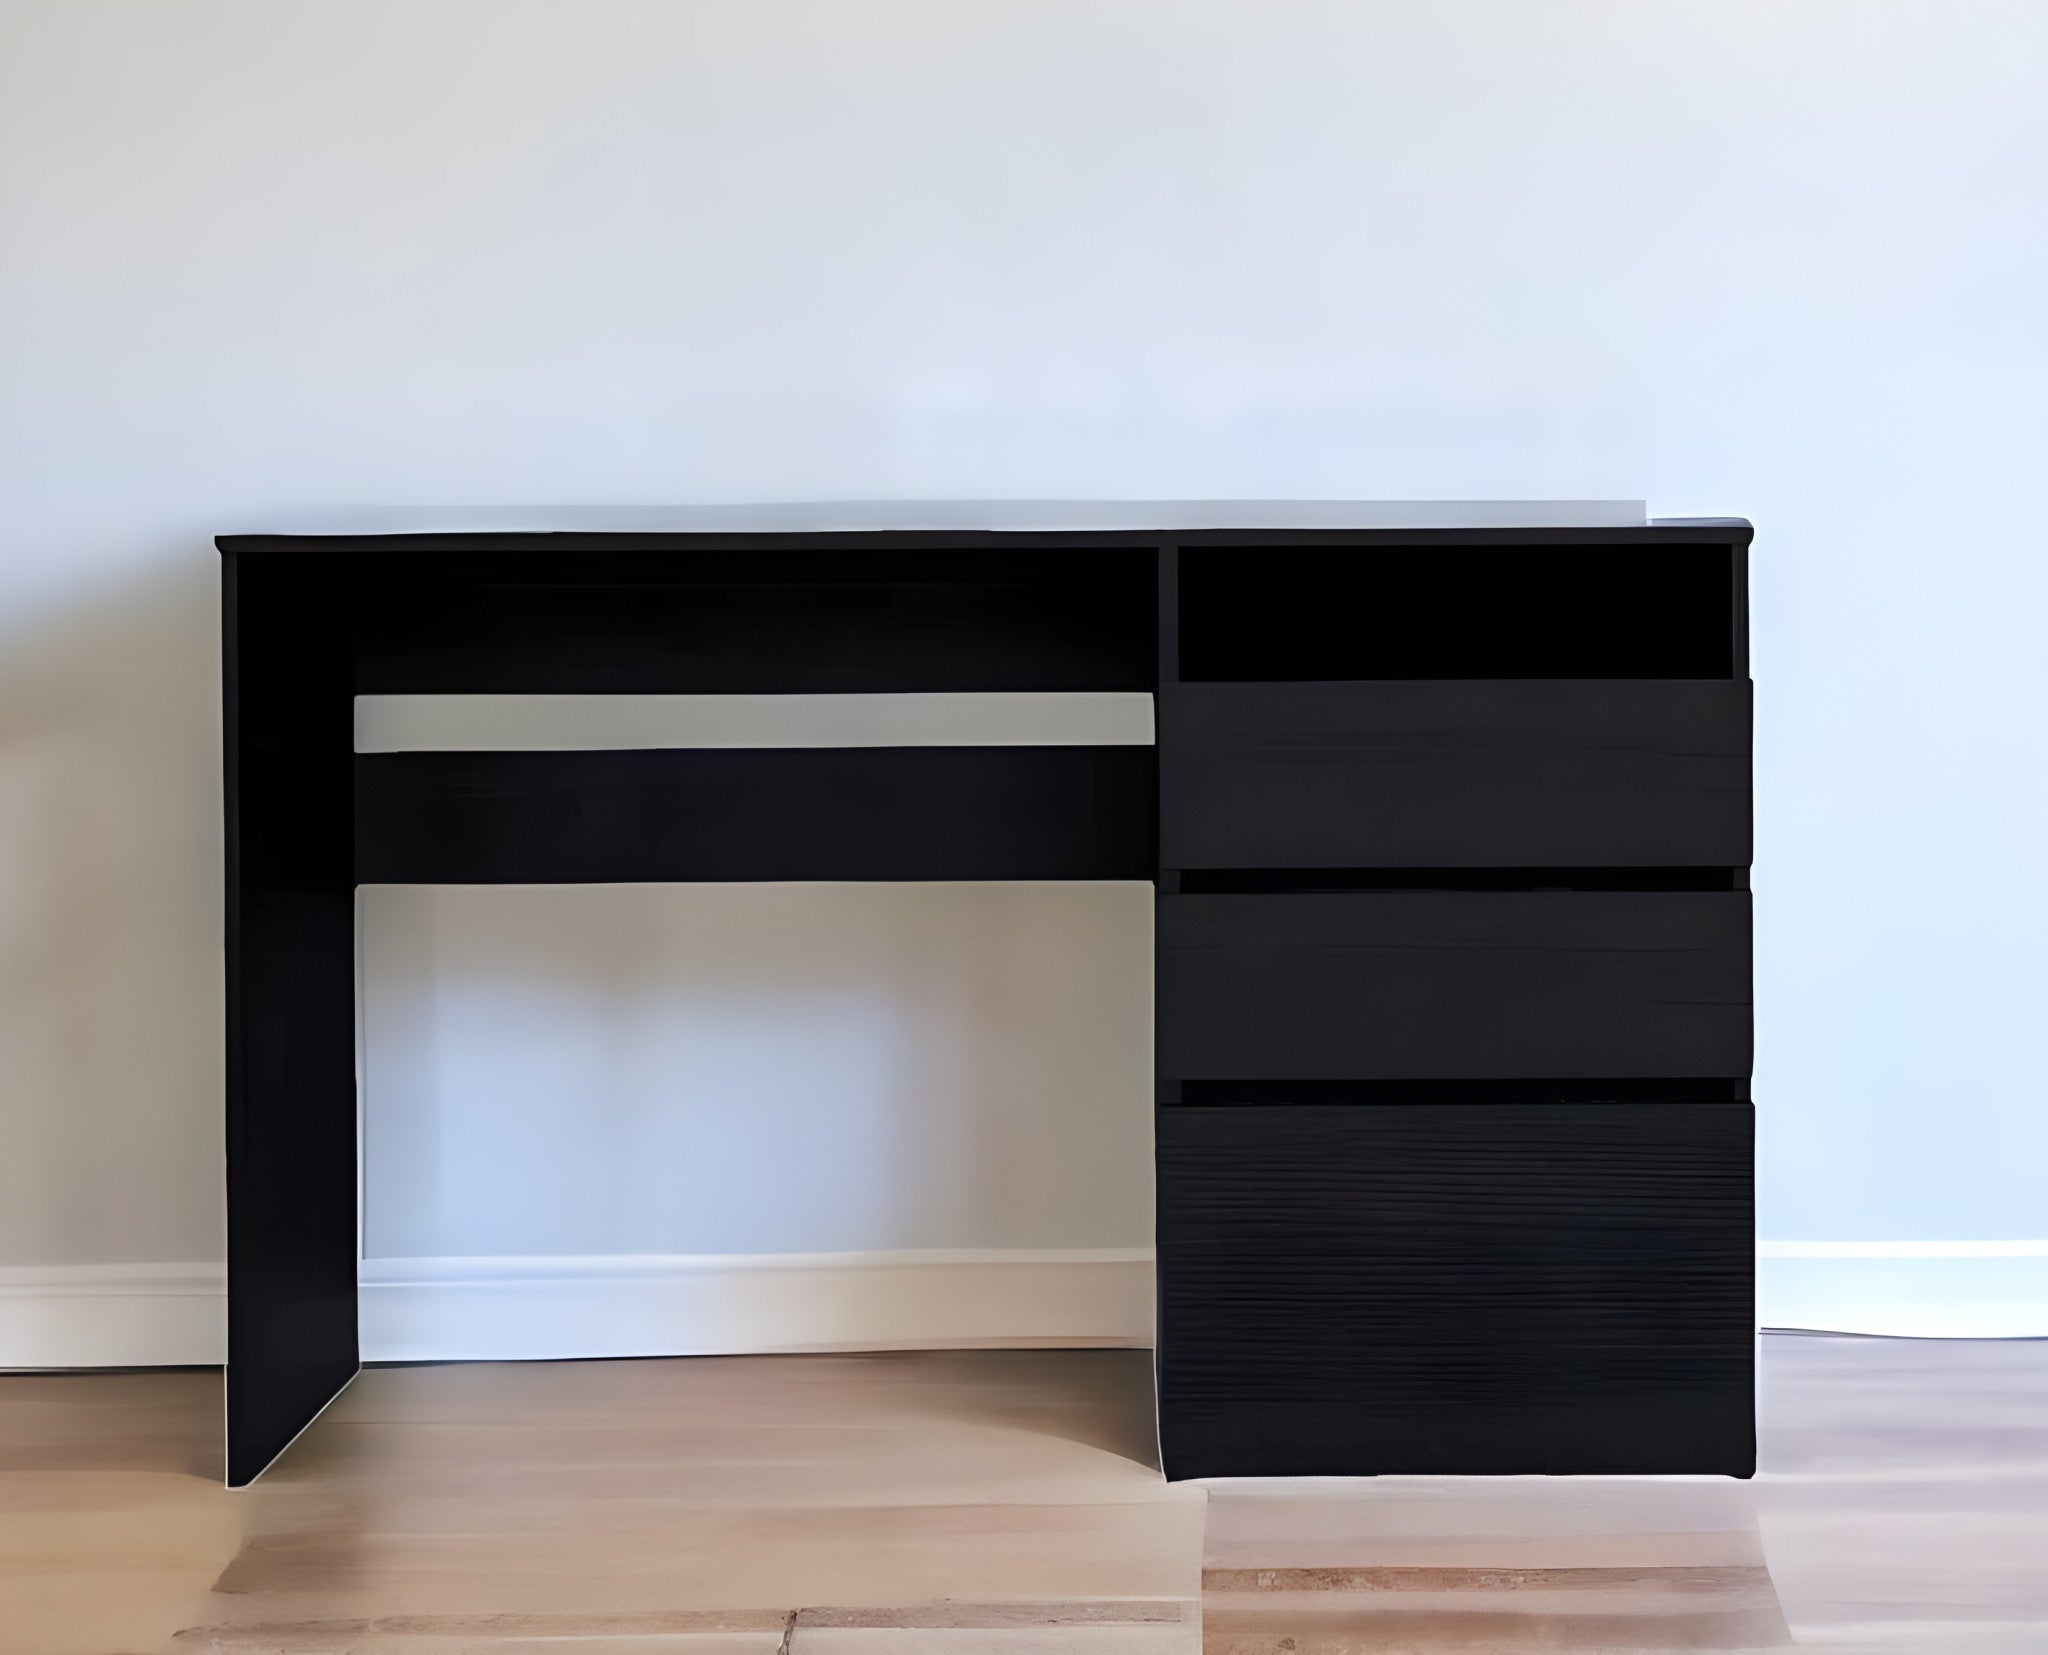 47" Black Computer Desk With Three Drawers